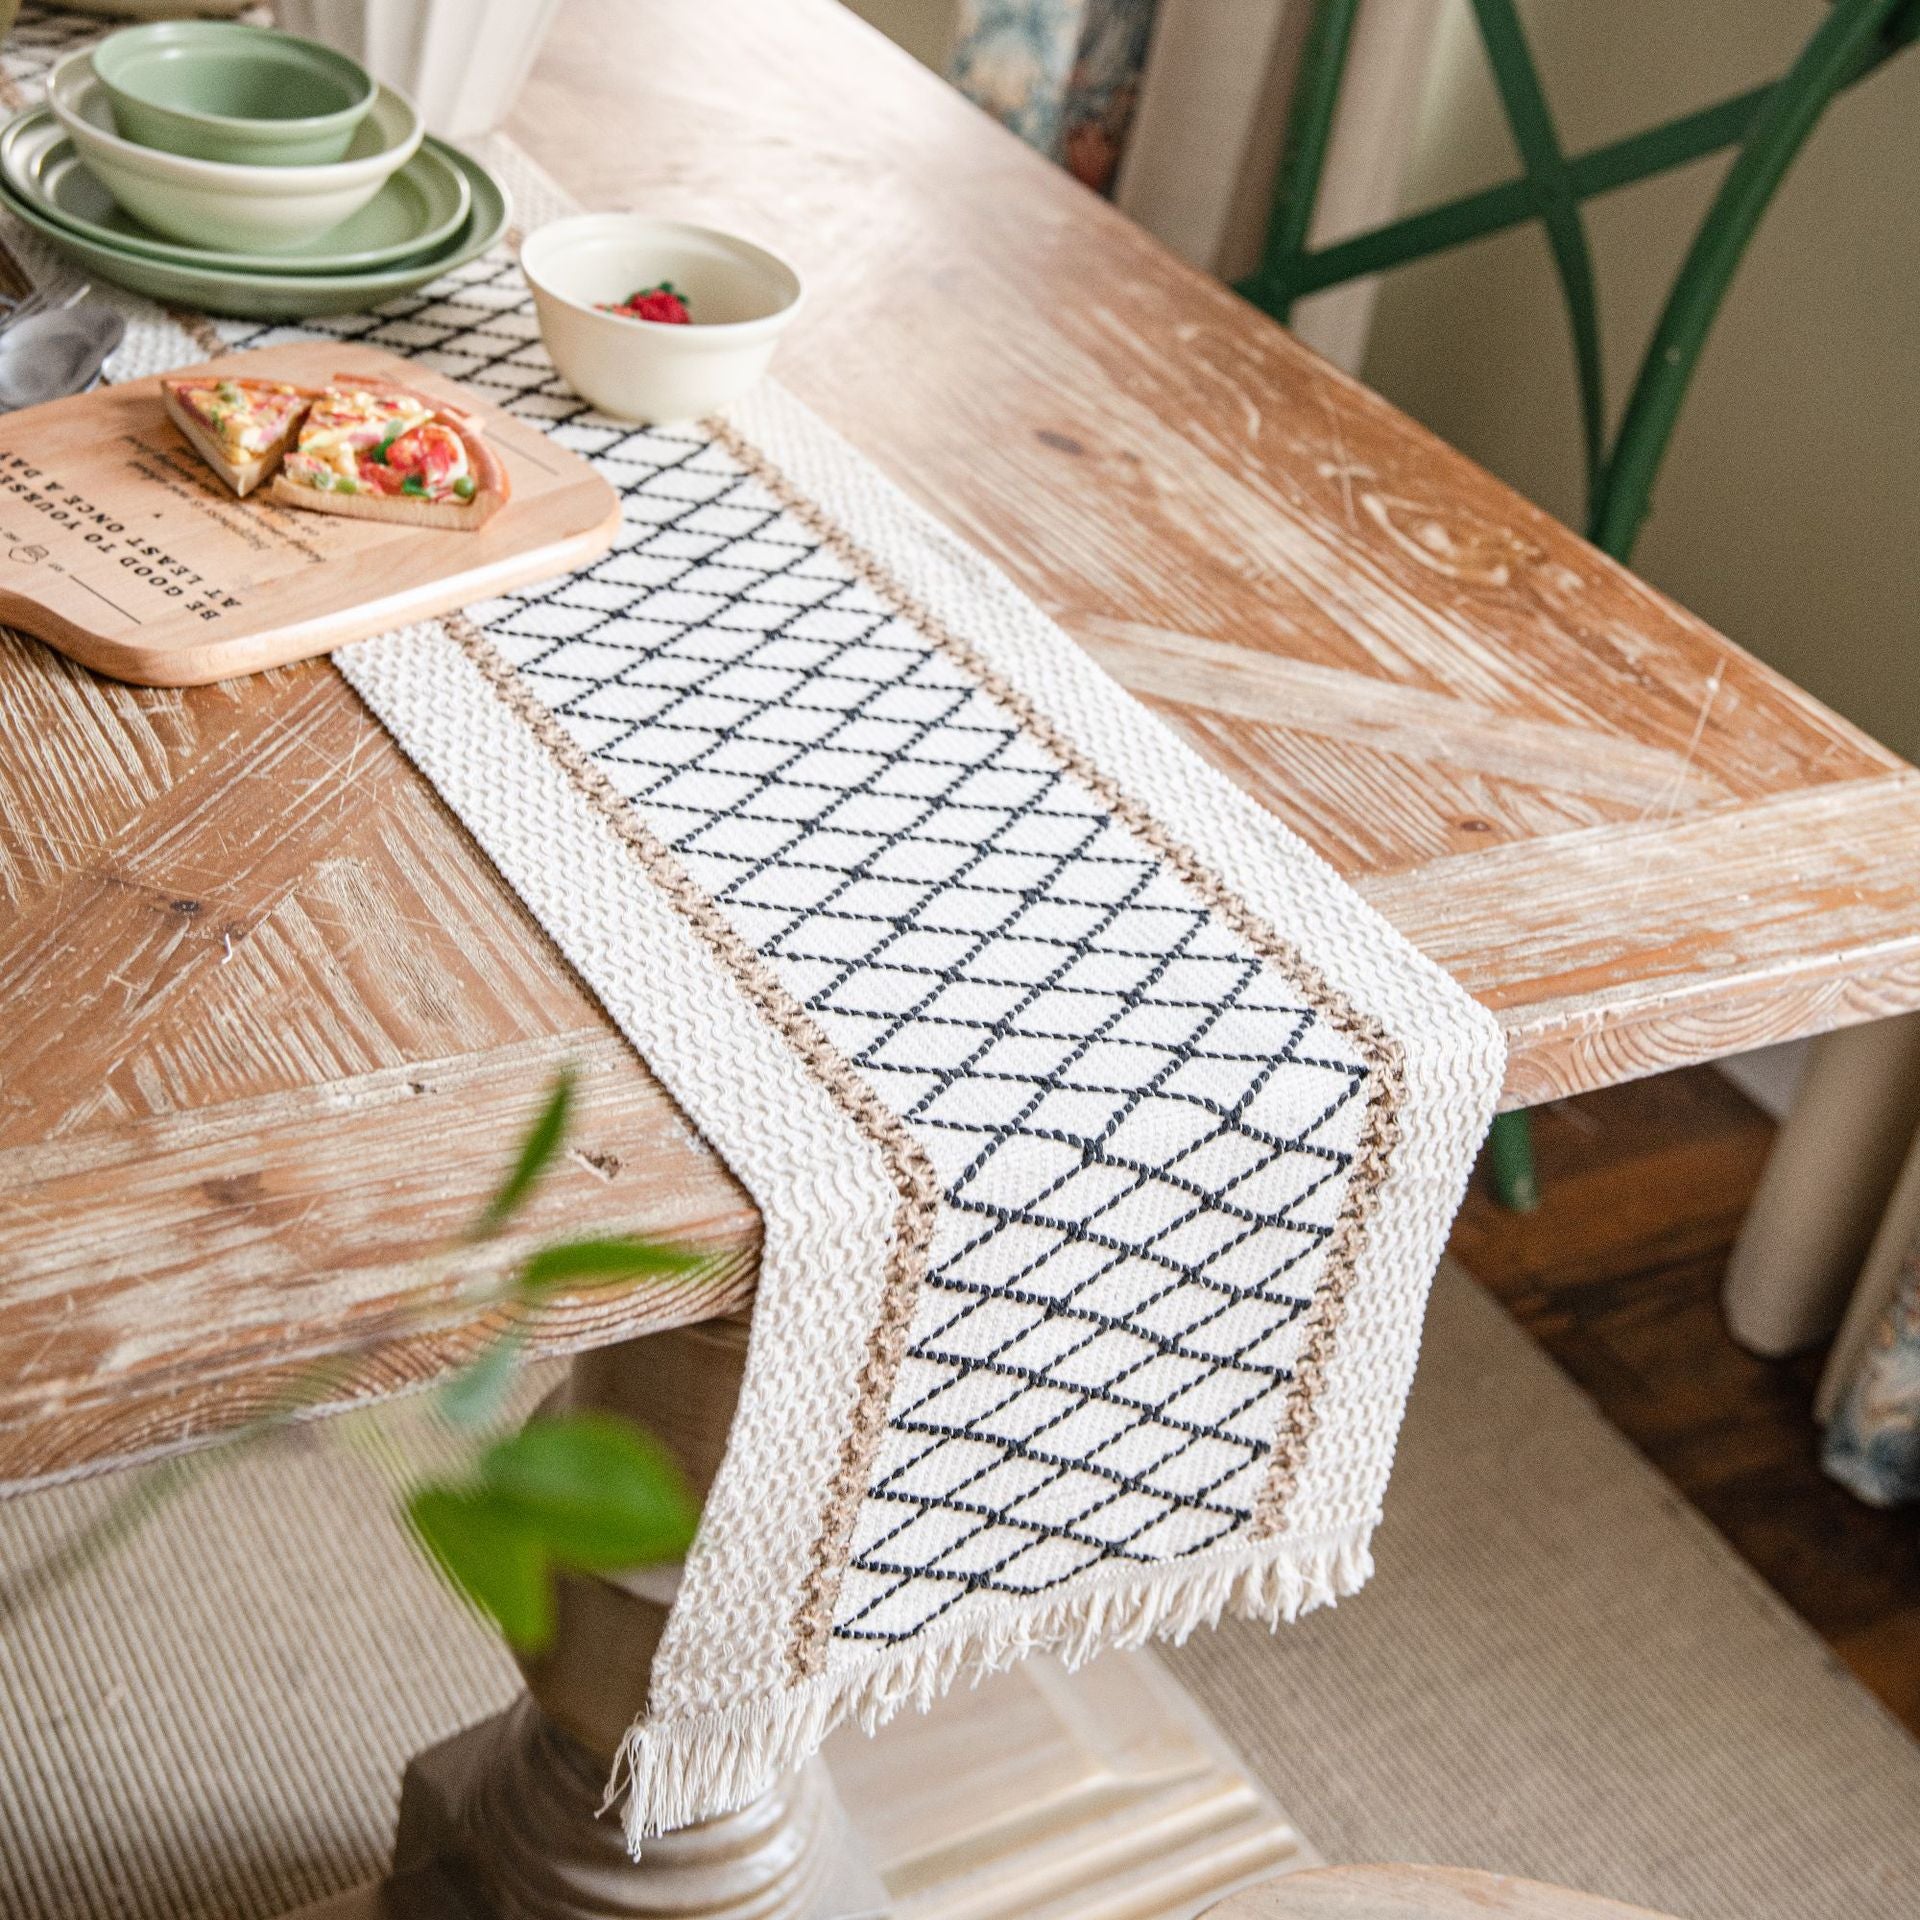 Linen Table Nordic Tablecloth